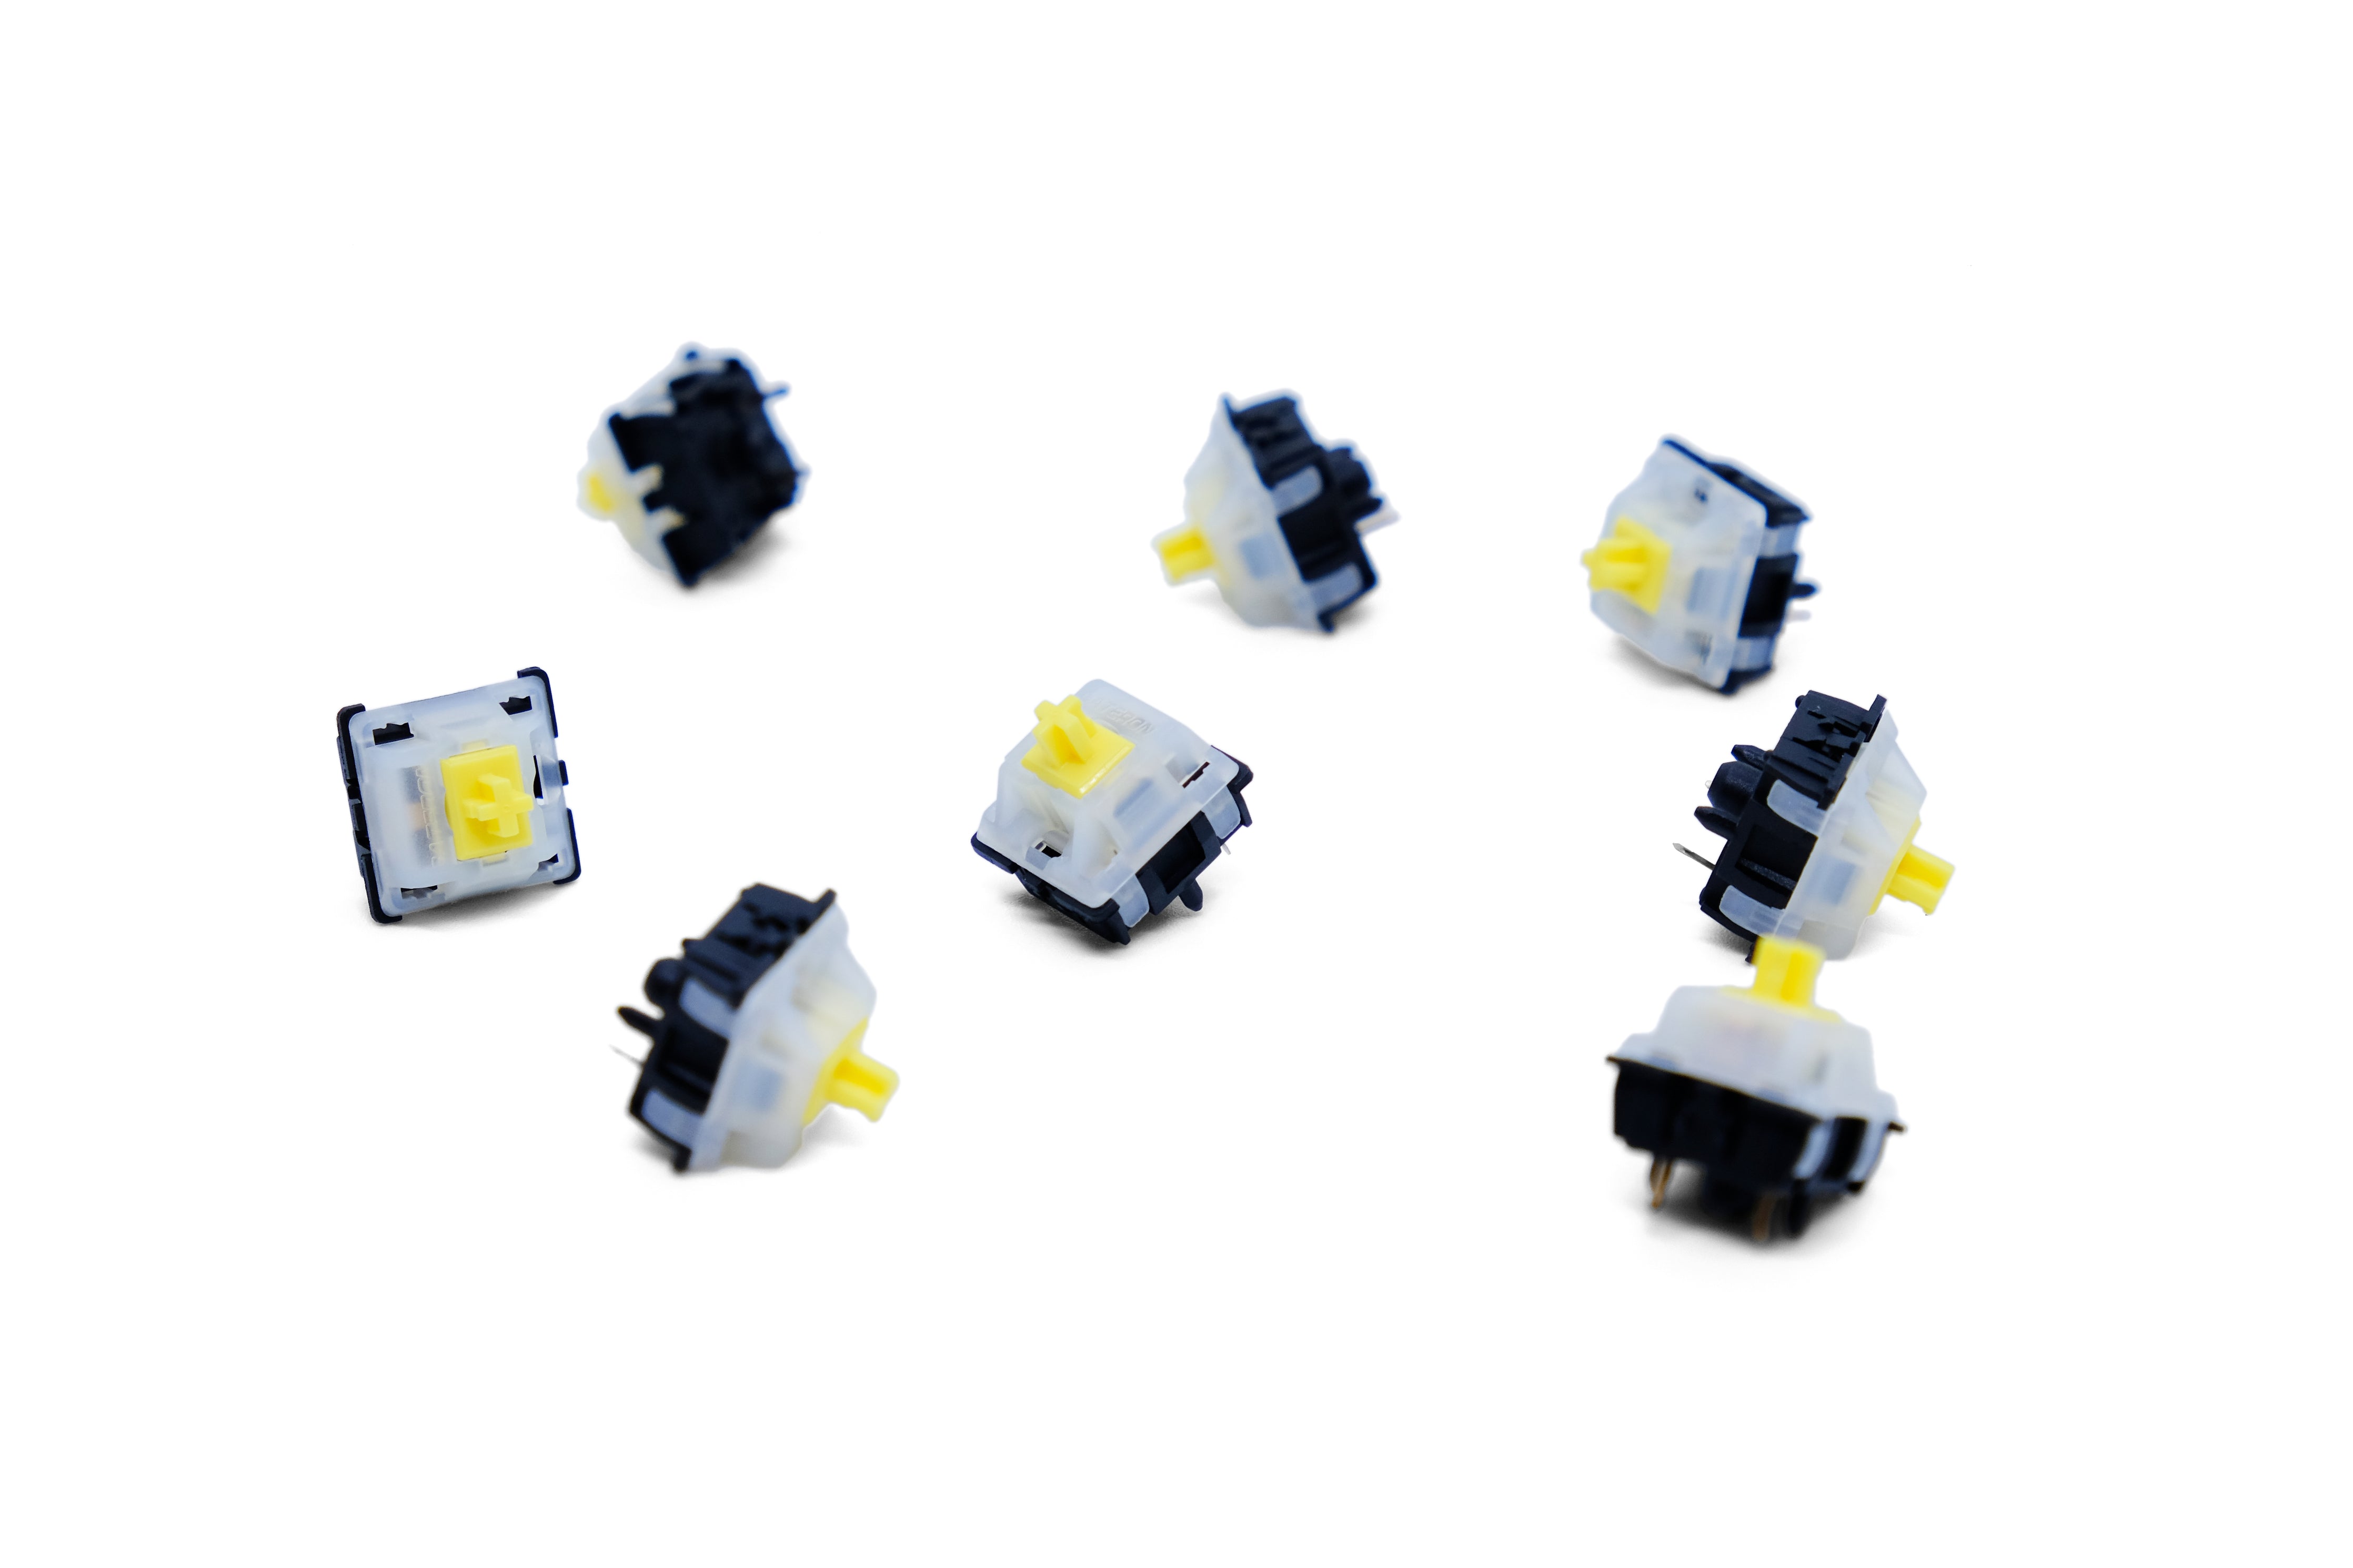 Group of Gateron Milky Yellow with Black Housing Linear Switches